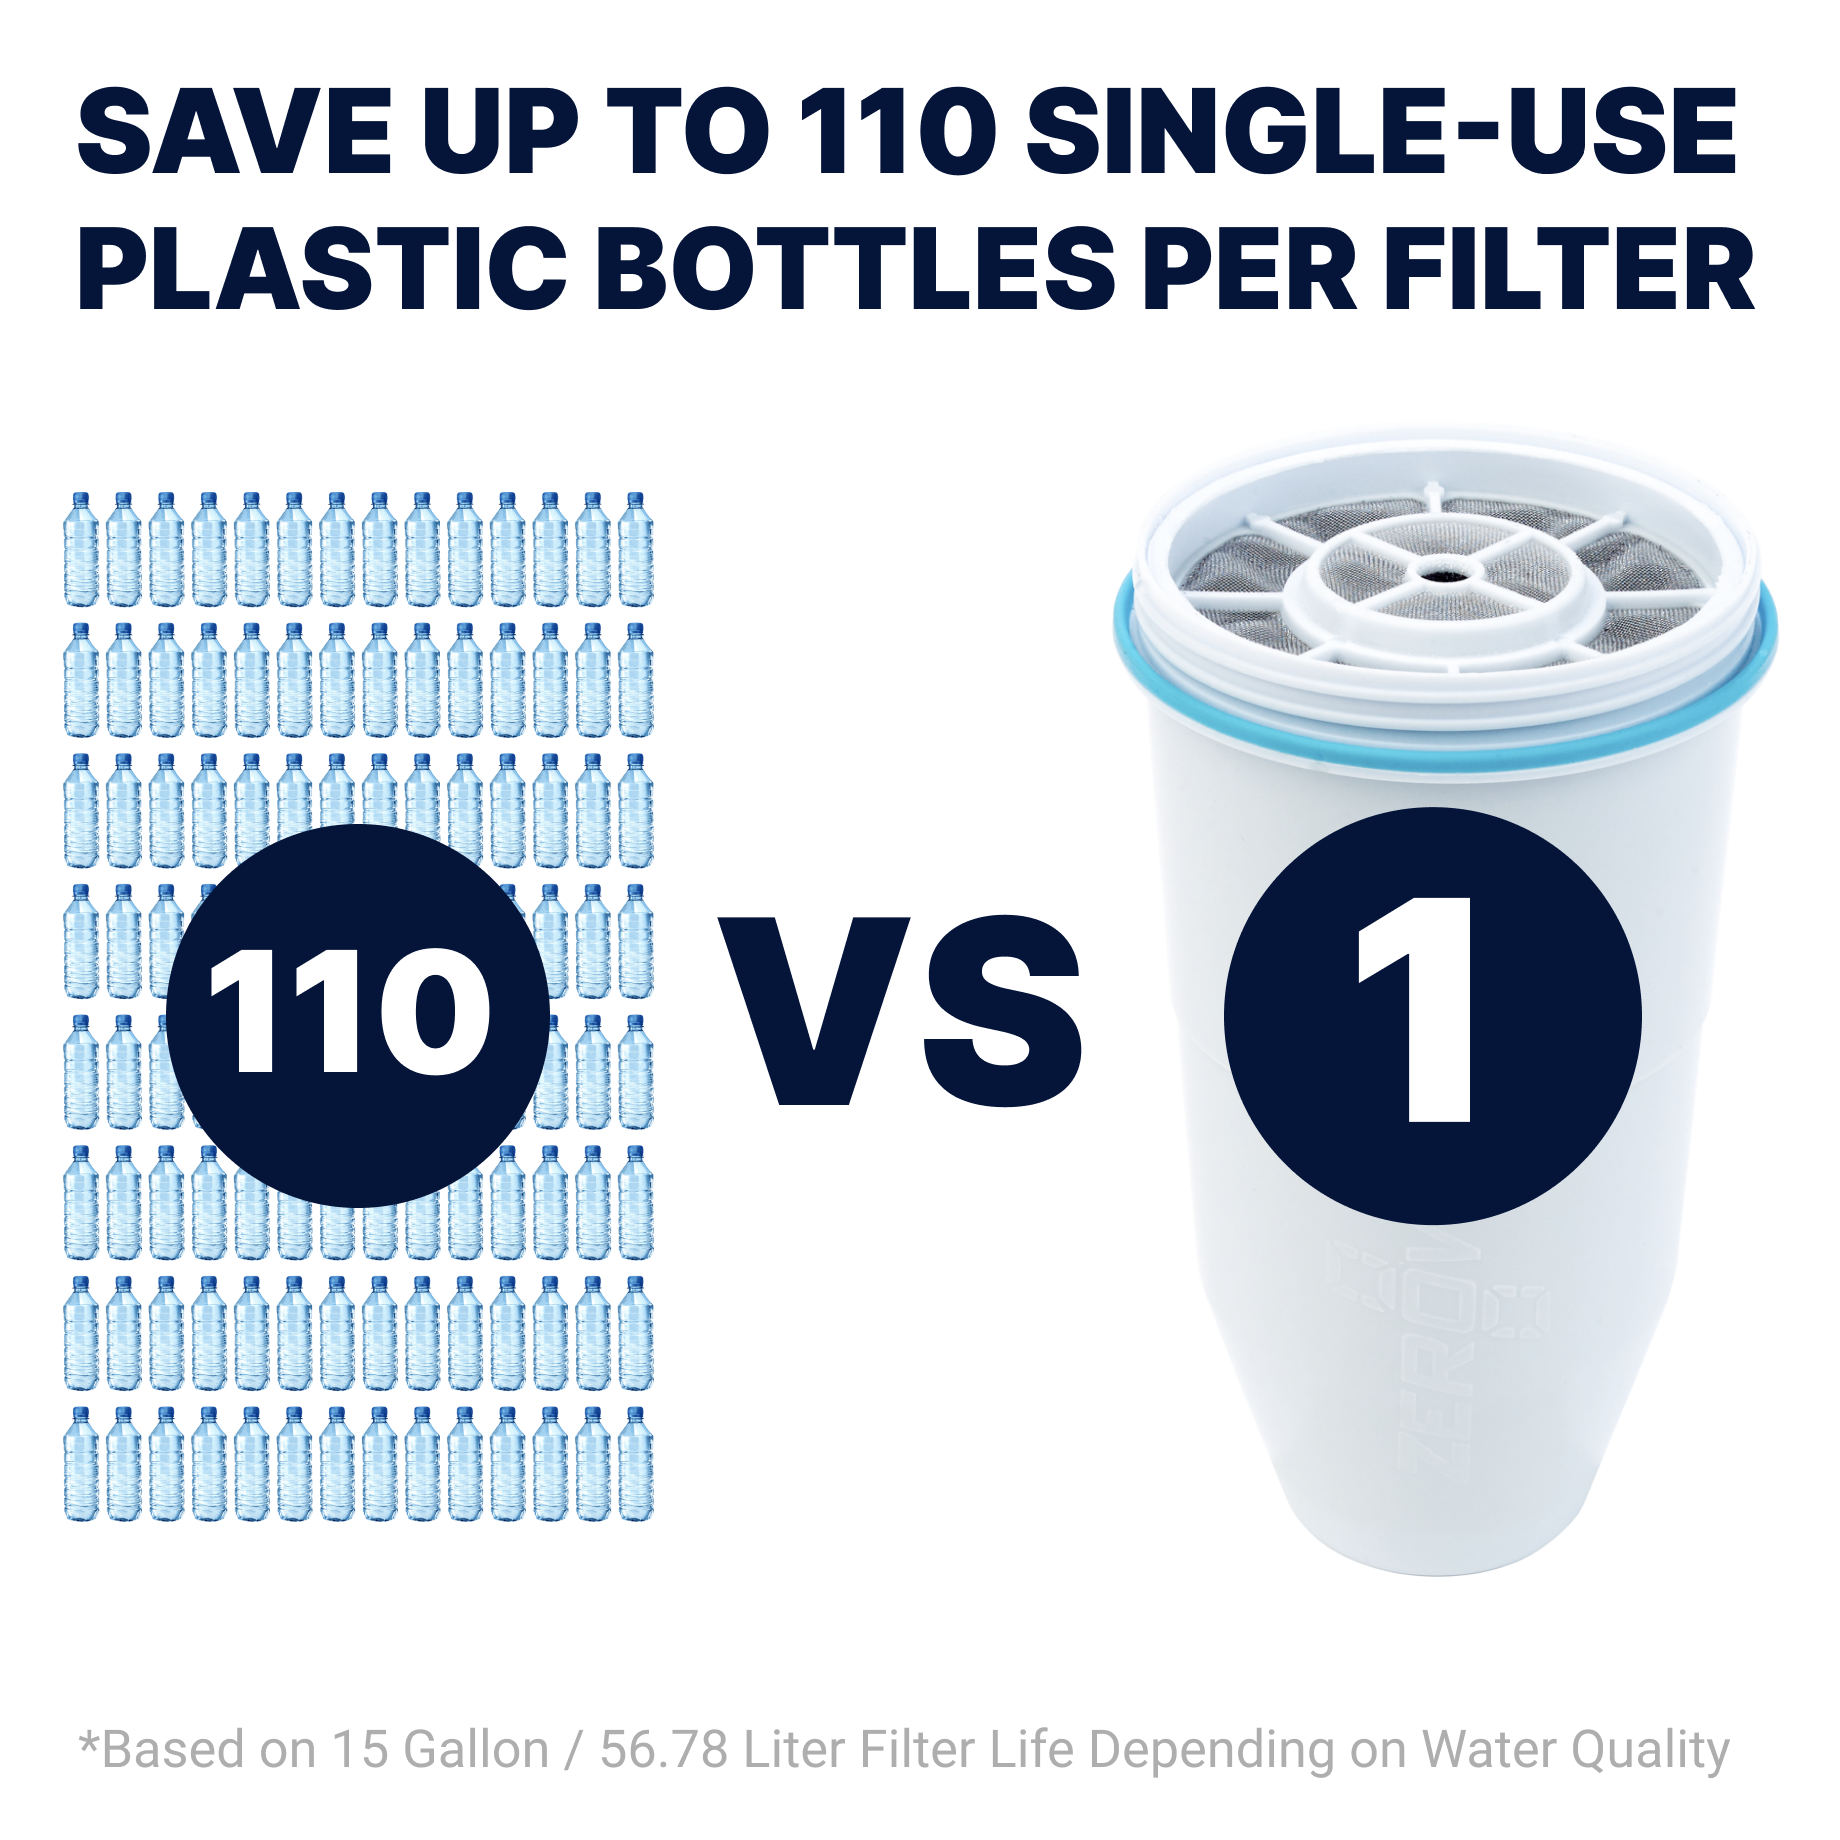 Save up to 110 single-use plastic bottles per filter